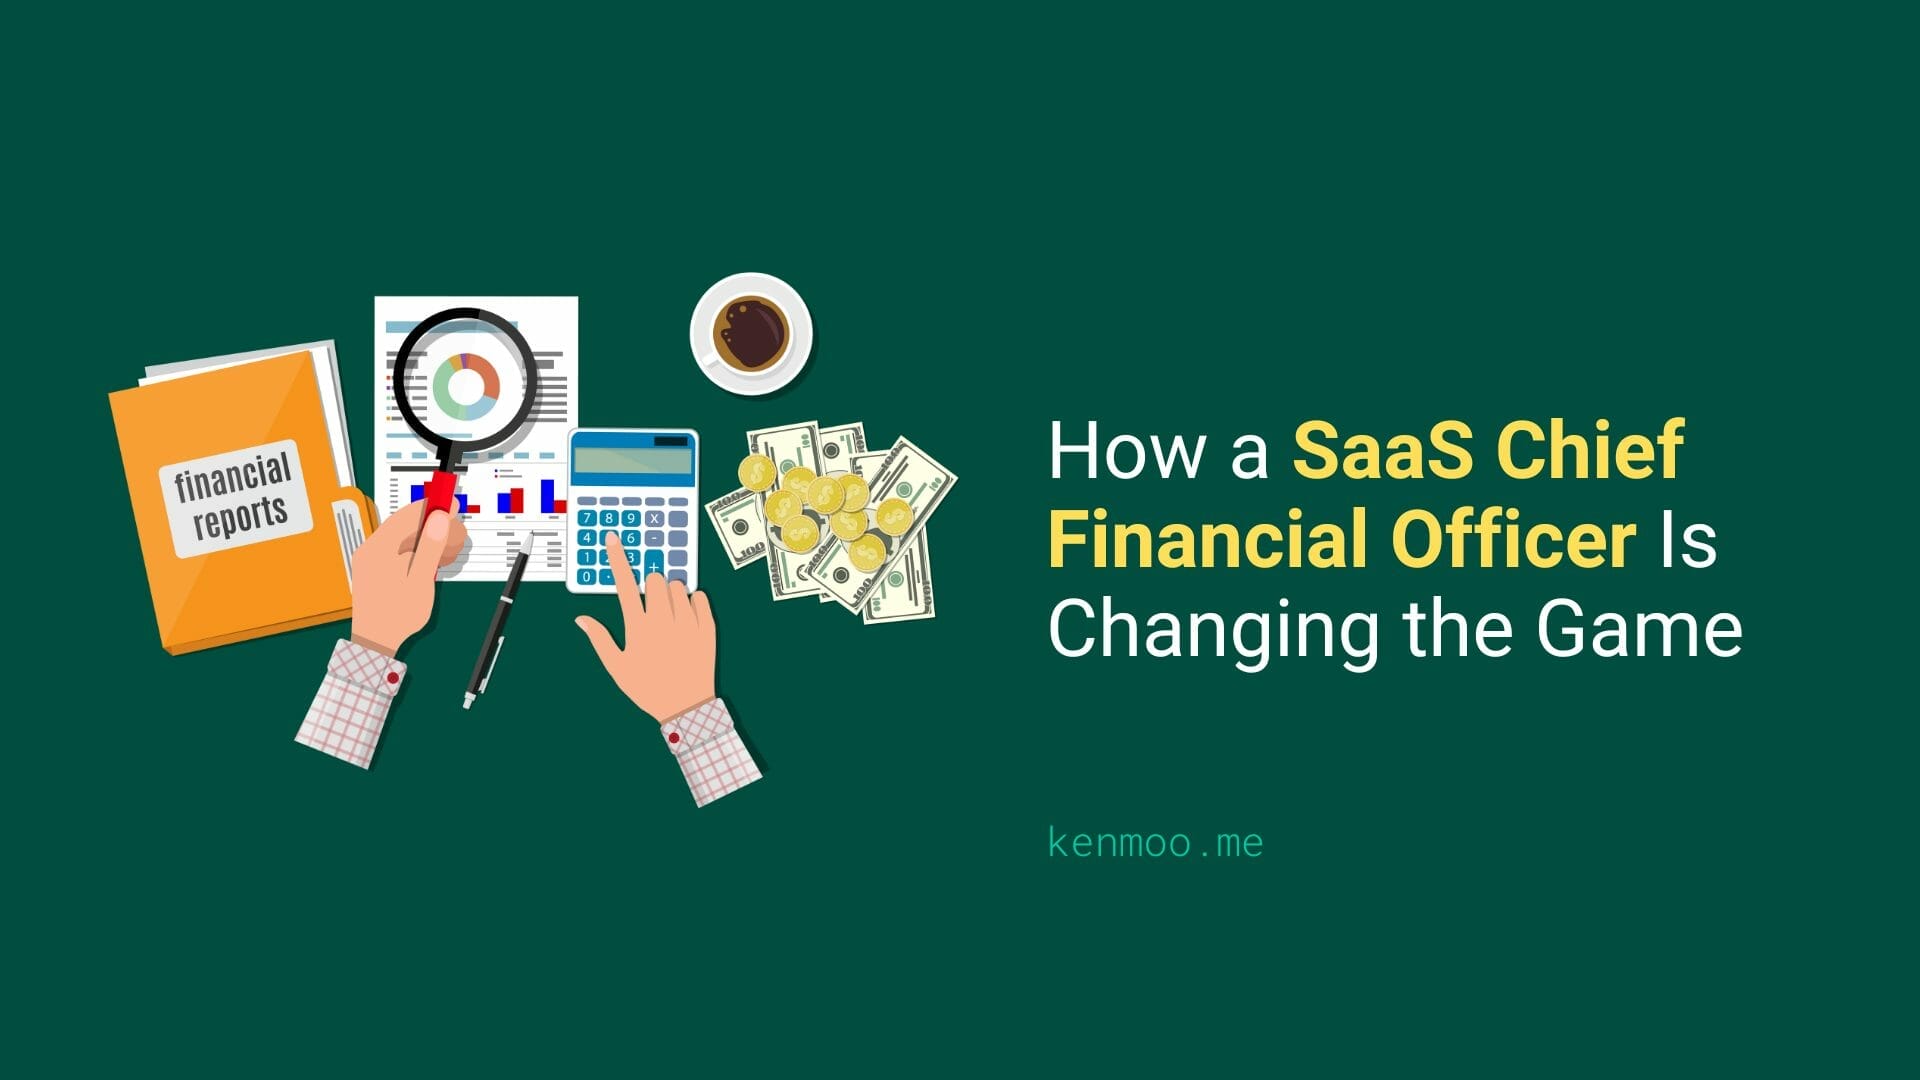 How a SaaS Chief Financial Officer Is Changing the Game